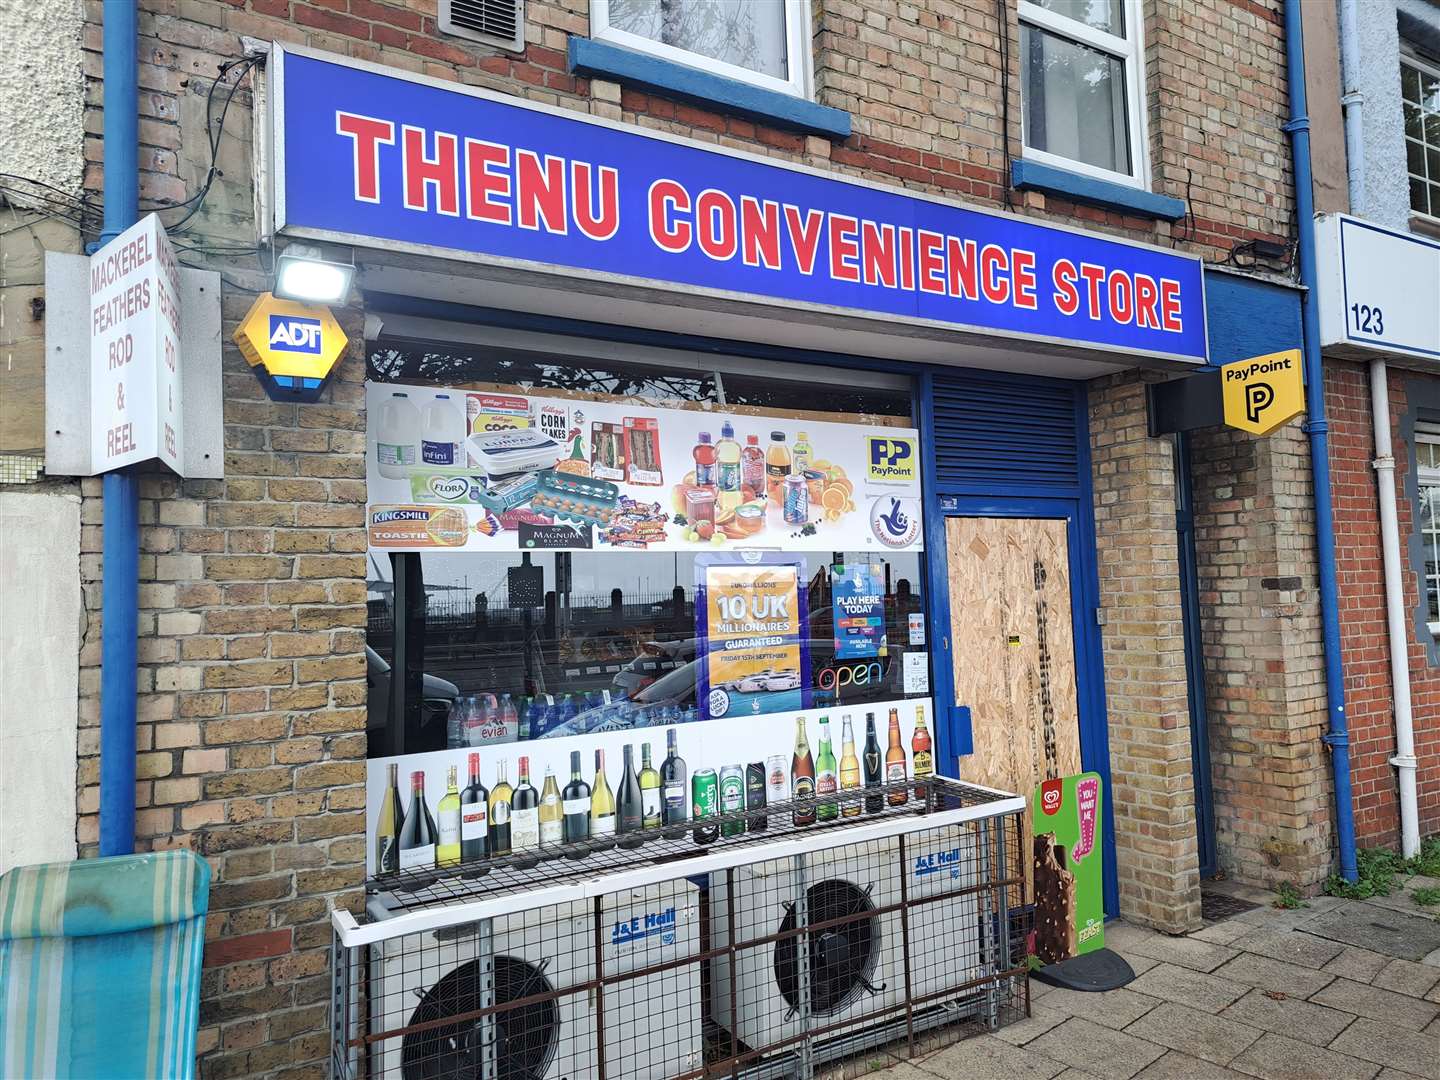 The door to Thenu Convenience Store in Snargate Street, Dover, has been boarded up